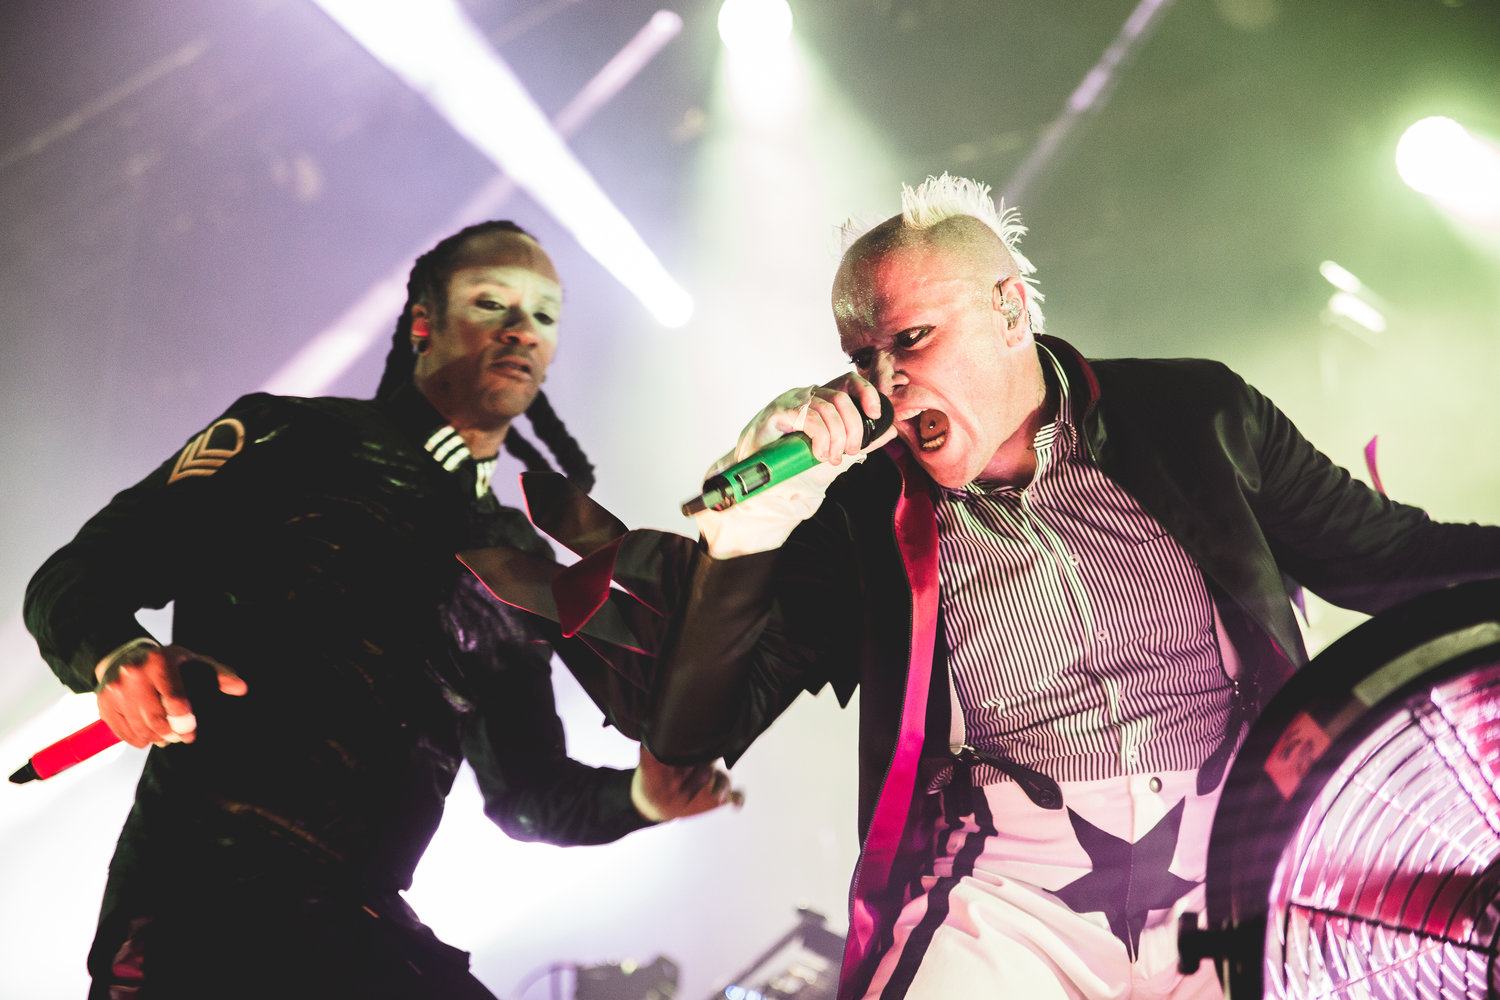 THE PRODIGY PERFORMING AT GLASGOW’S SEC - HALL 4 - KICKING OFF THEIR UK TOUR - 02.11.2018 PICTURE BY; FINDLAY MACDONALD PHOTOGRAPHY